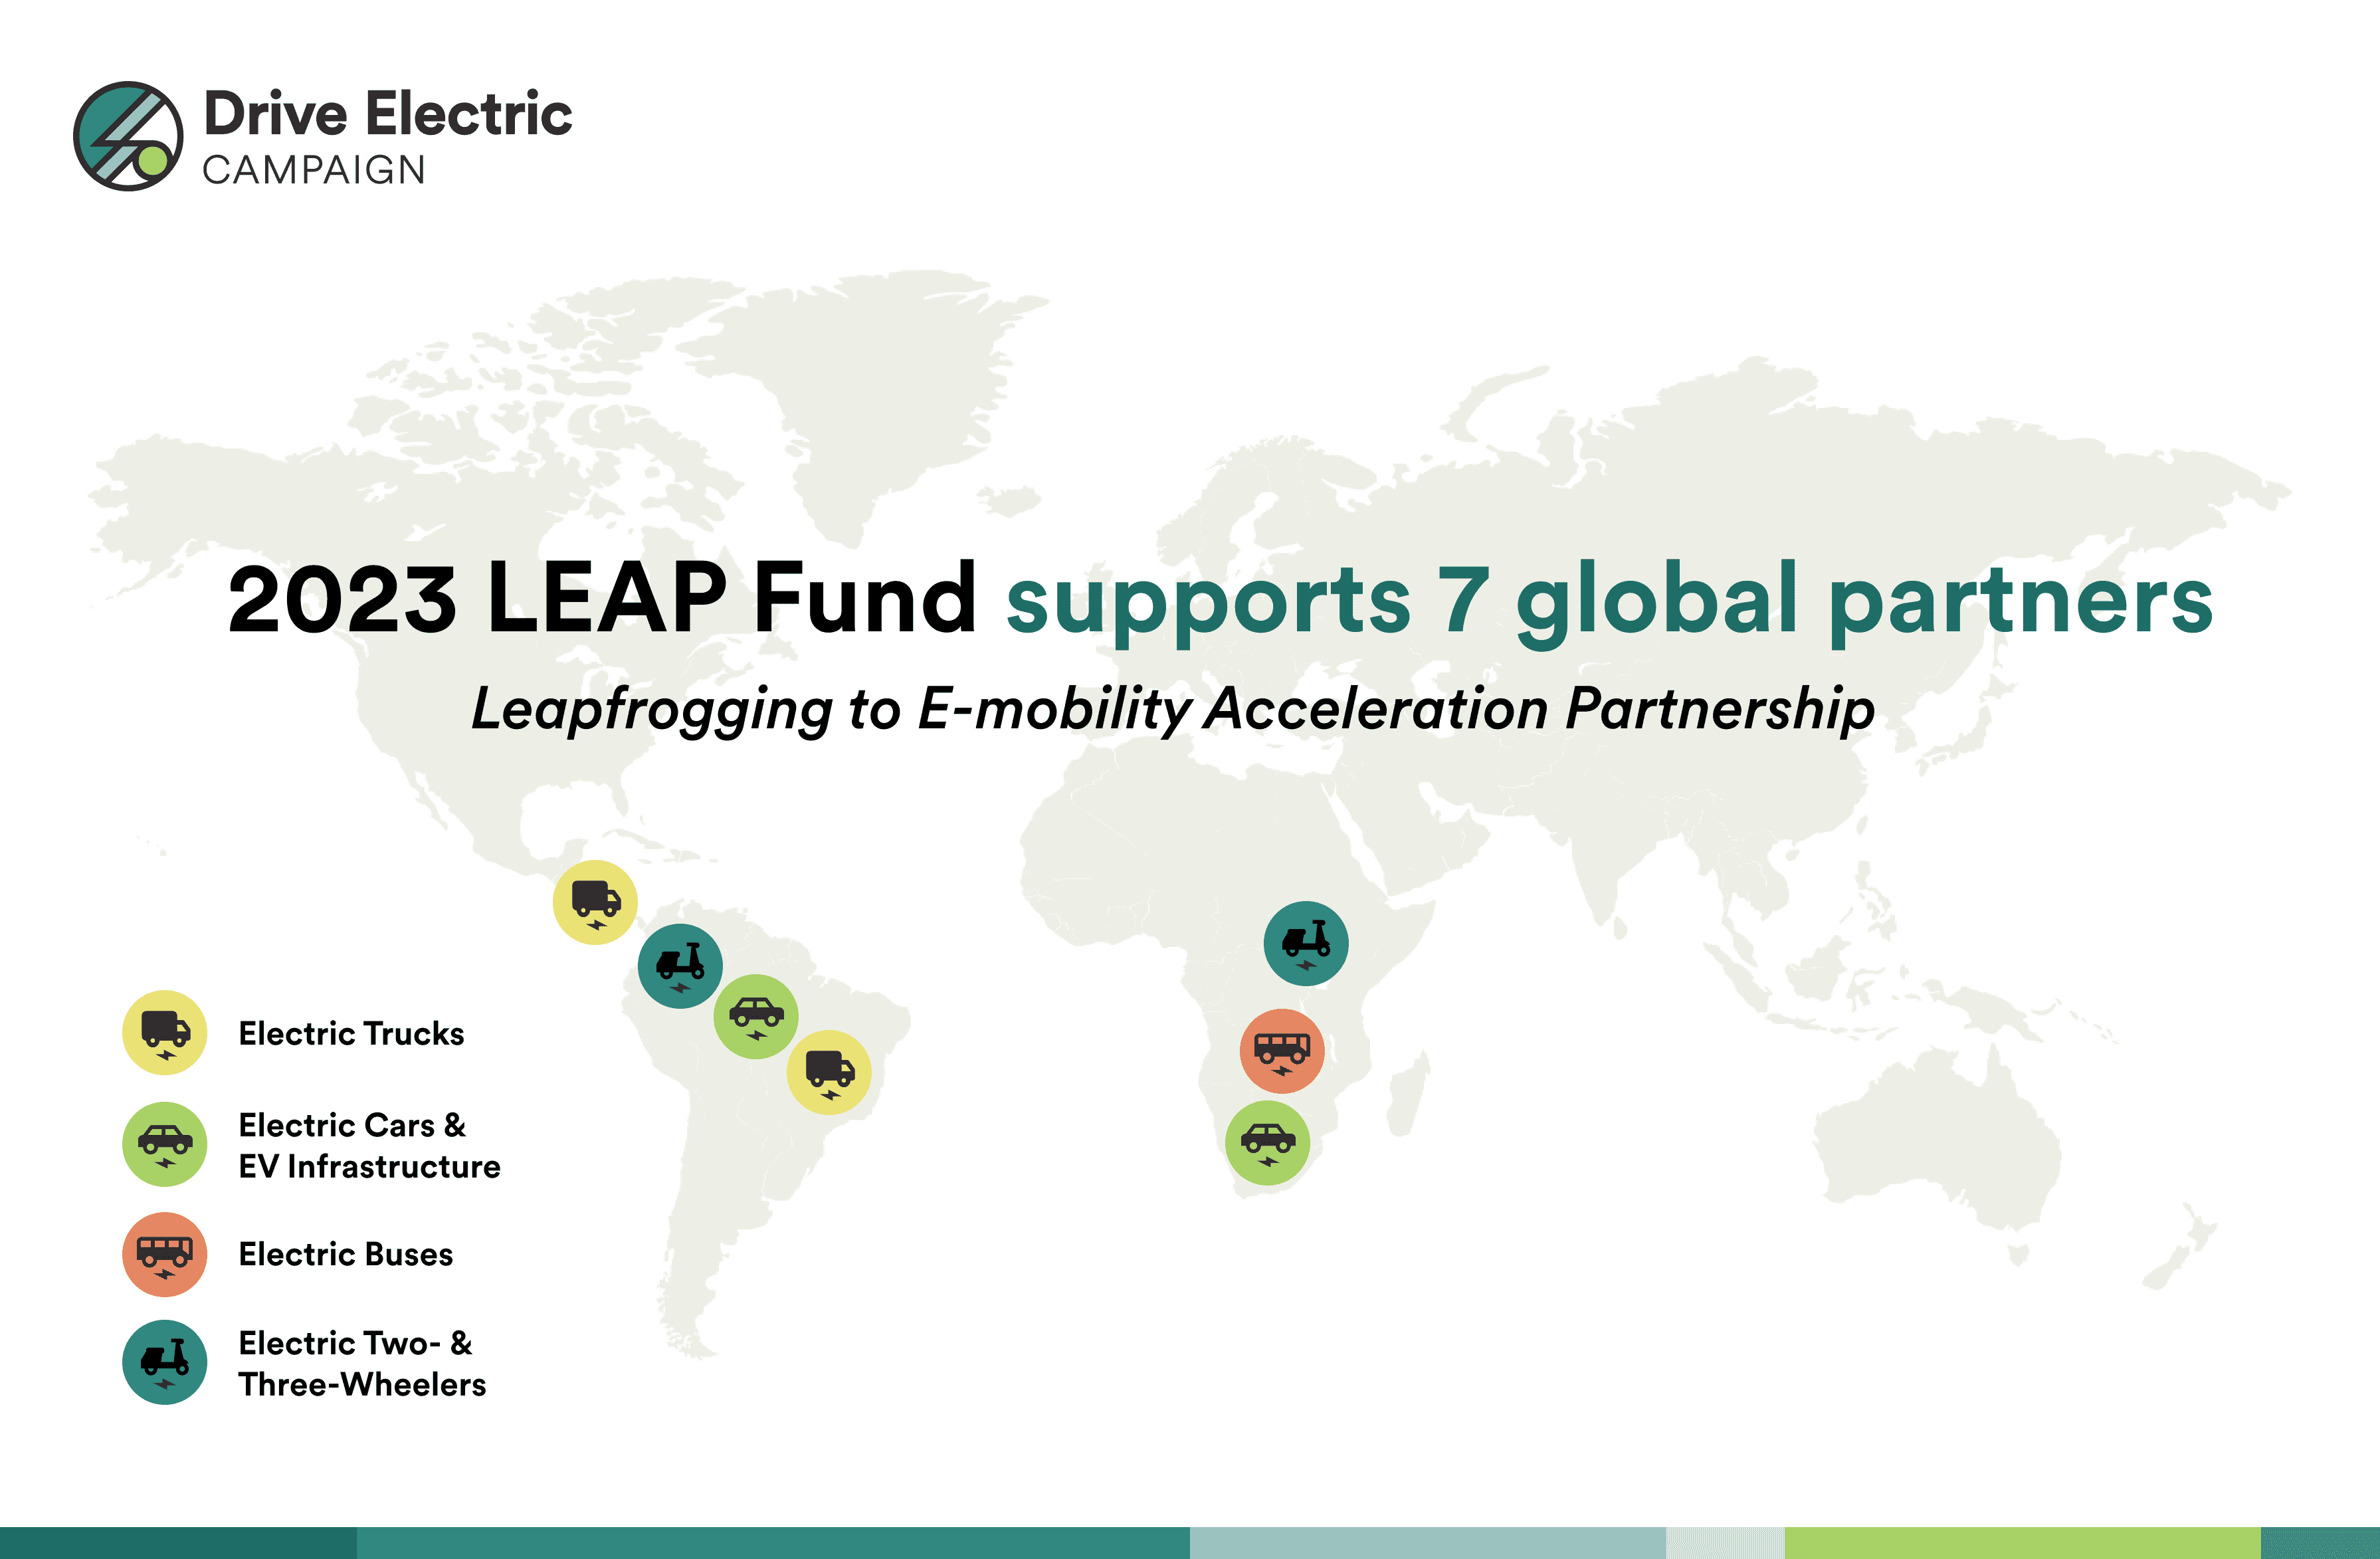 LEAP Fund growth: supporting 7 partners to drive e-mobility in Africa